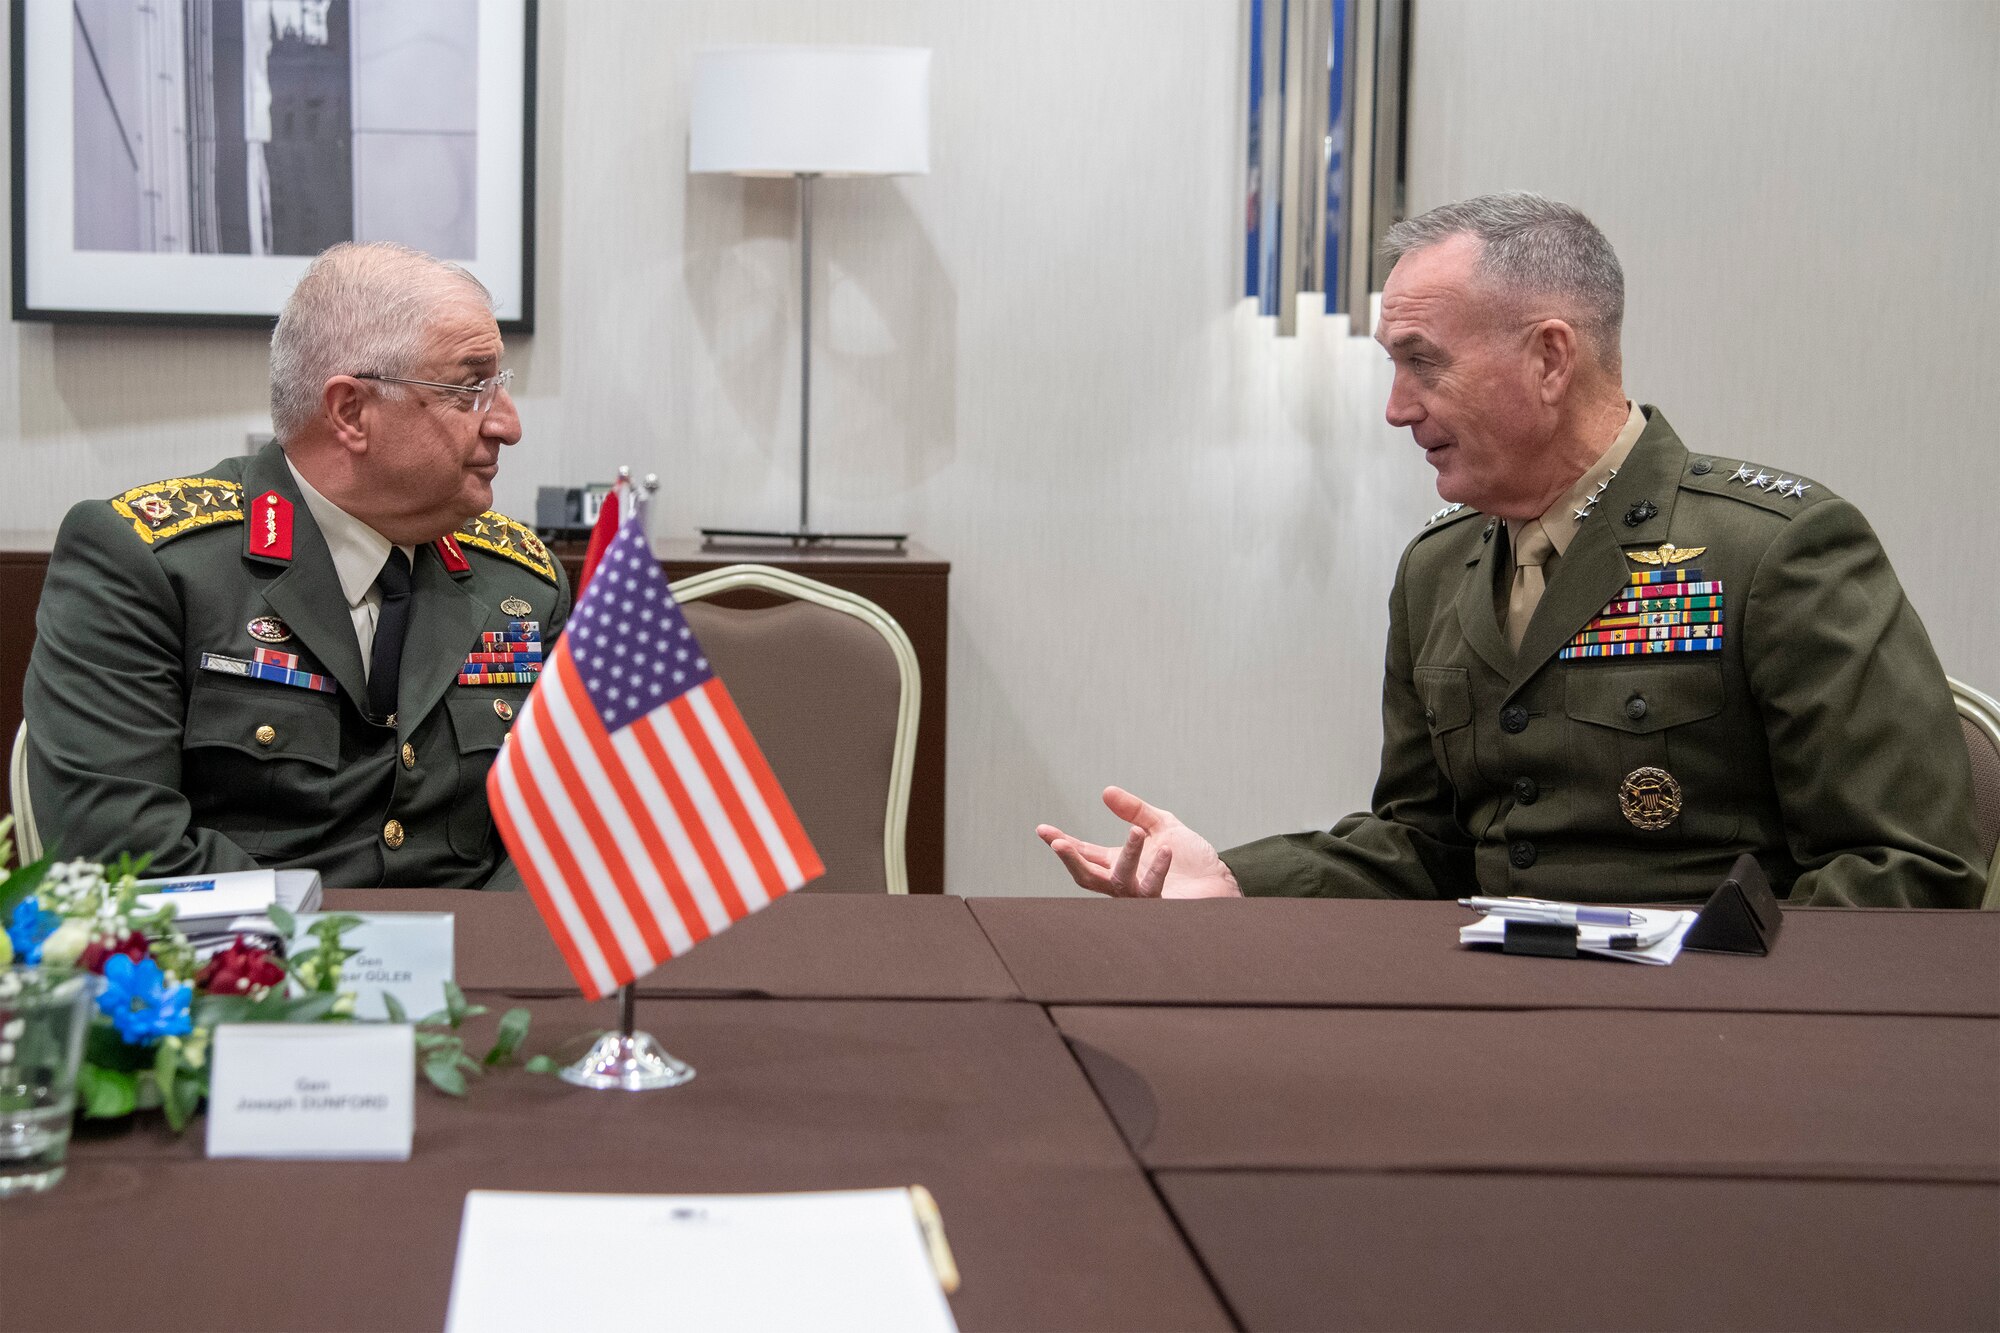 Marine Corps Gen. Joe Dunford, chairman of the Joint Chiefs of Staff, speaks with Turkish Gen.  Yaşar Güler, General Staff of the Republic of Turkey, during a bilateral meeting in between sessions of the NATO Military Committee Conference in Warsaw, Poland Sept. 29, 2018.